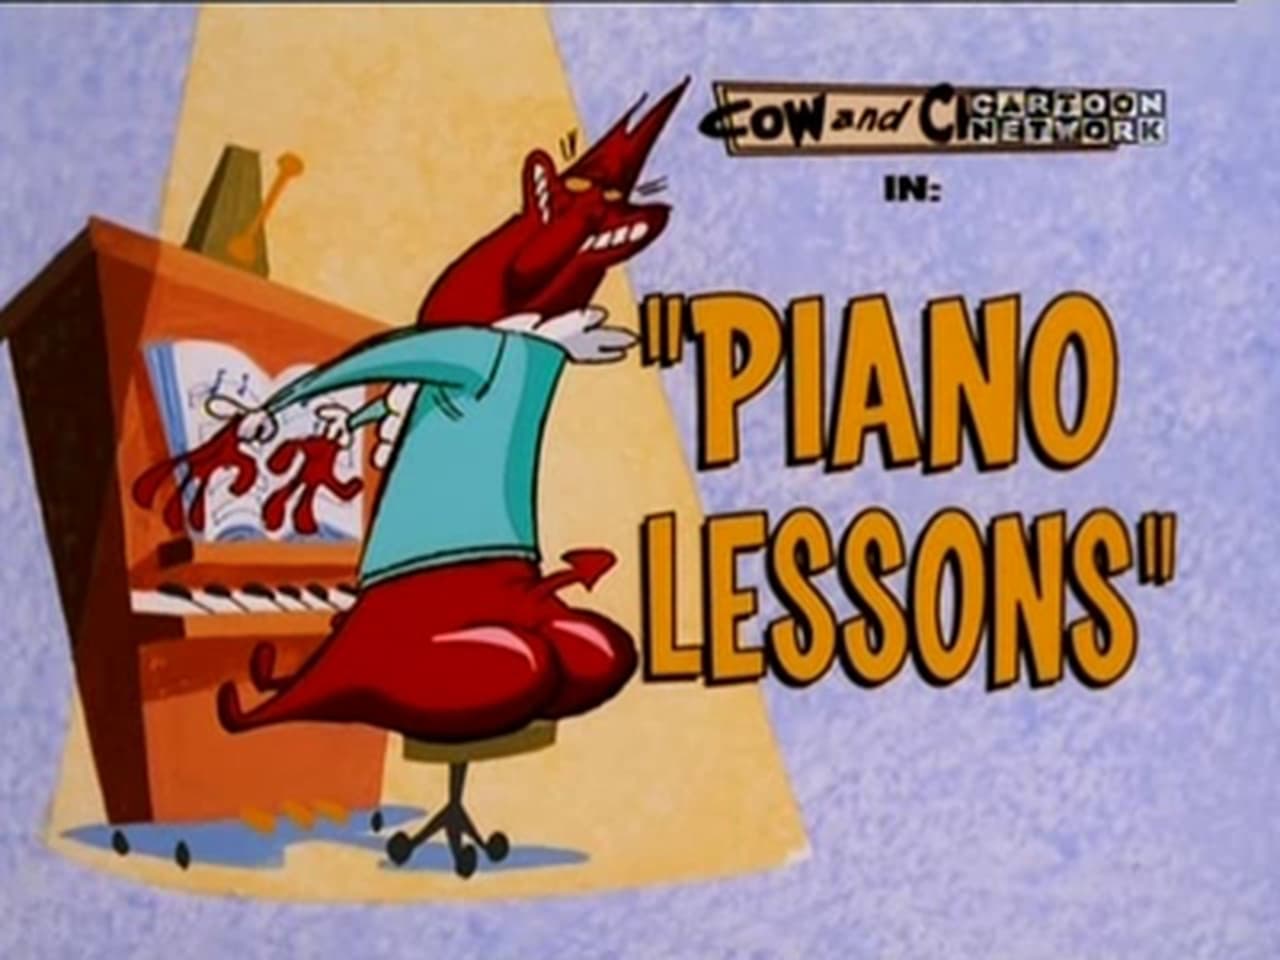 Cow and Chicken - Season 4 Episode 21 : Piano Lessons